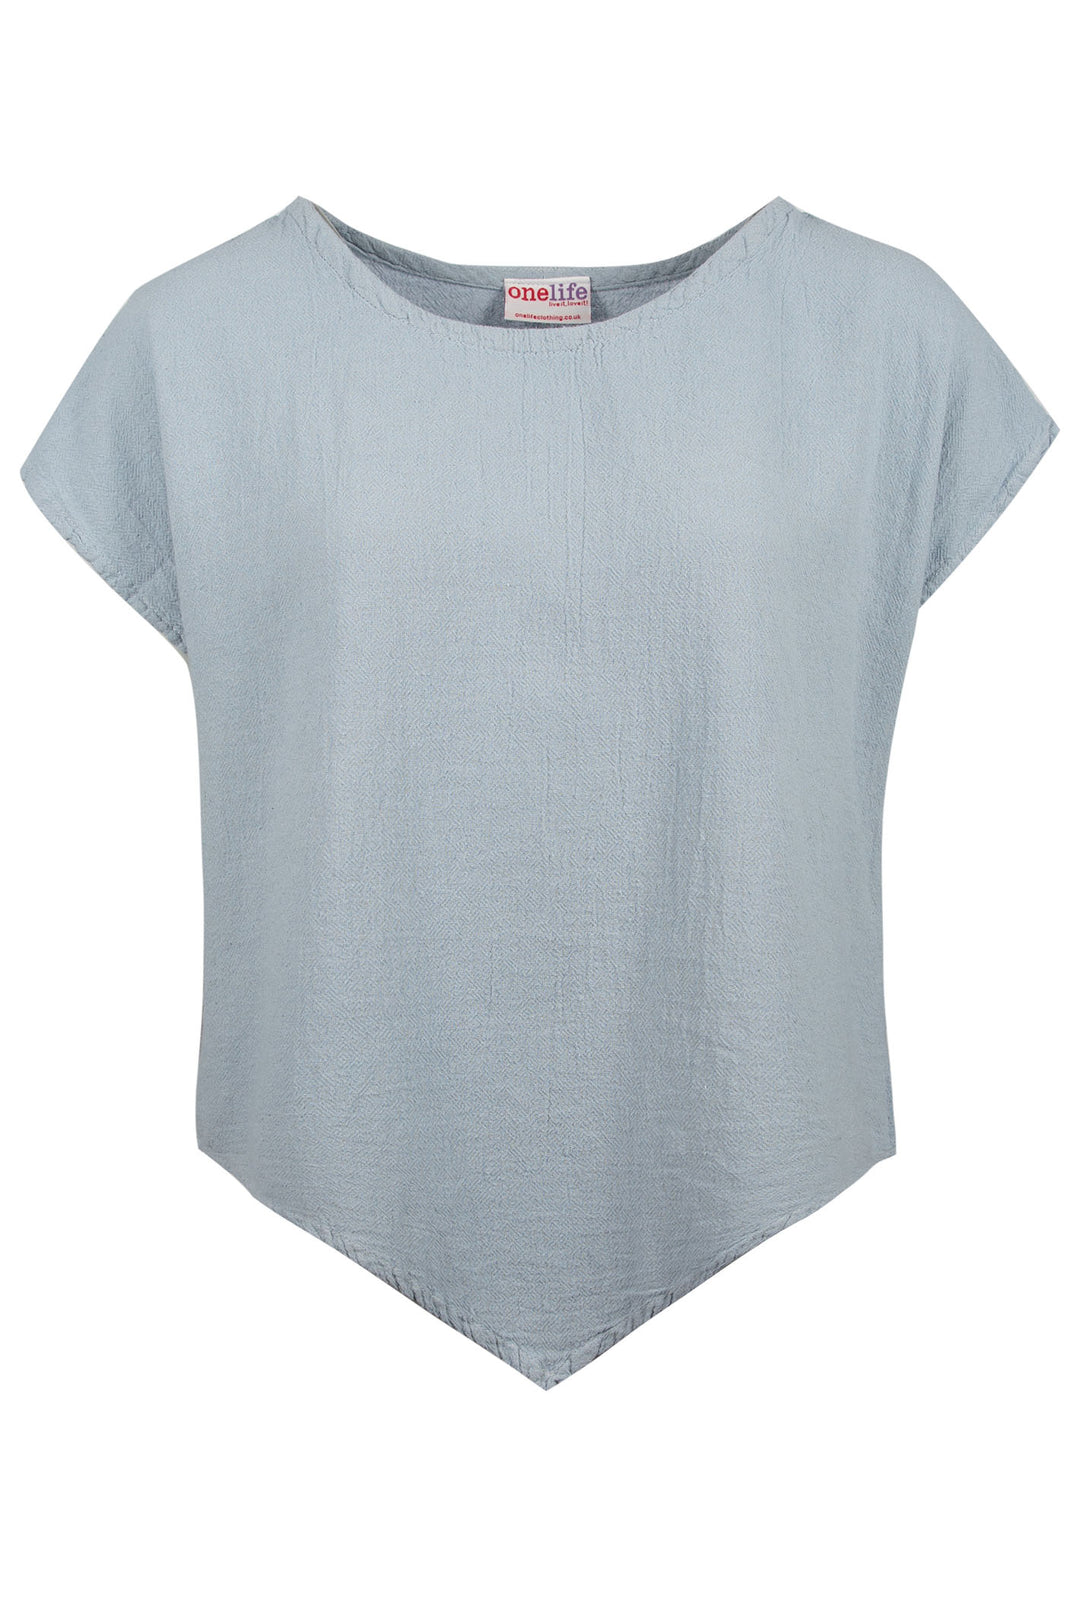 Onelife T002 Grace Dusty Blue Boat Neck Cotton Top - Experience Boutique